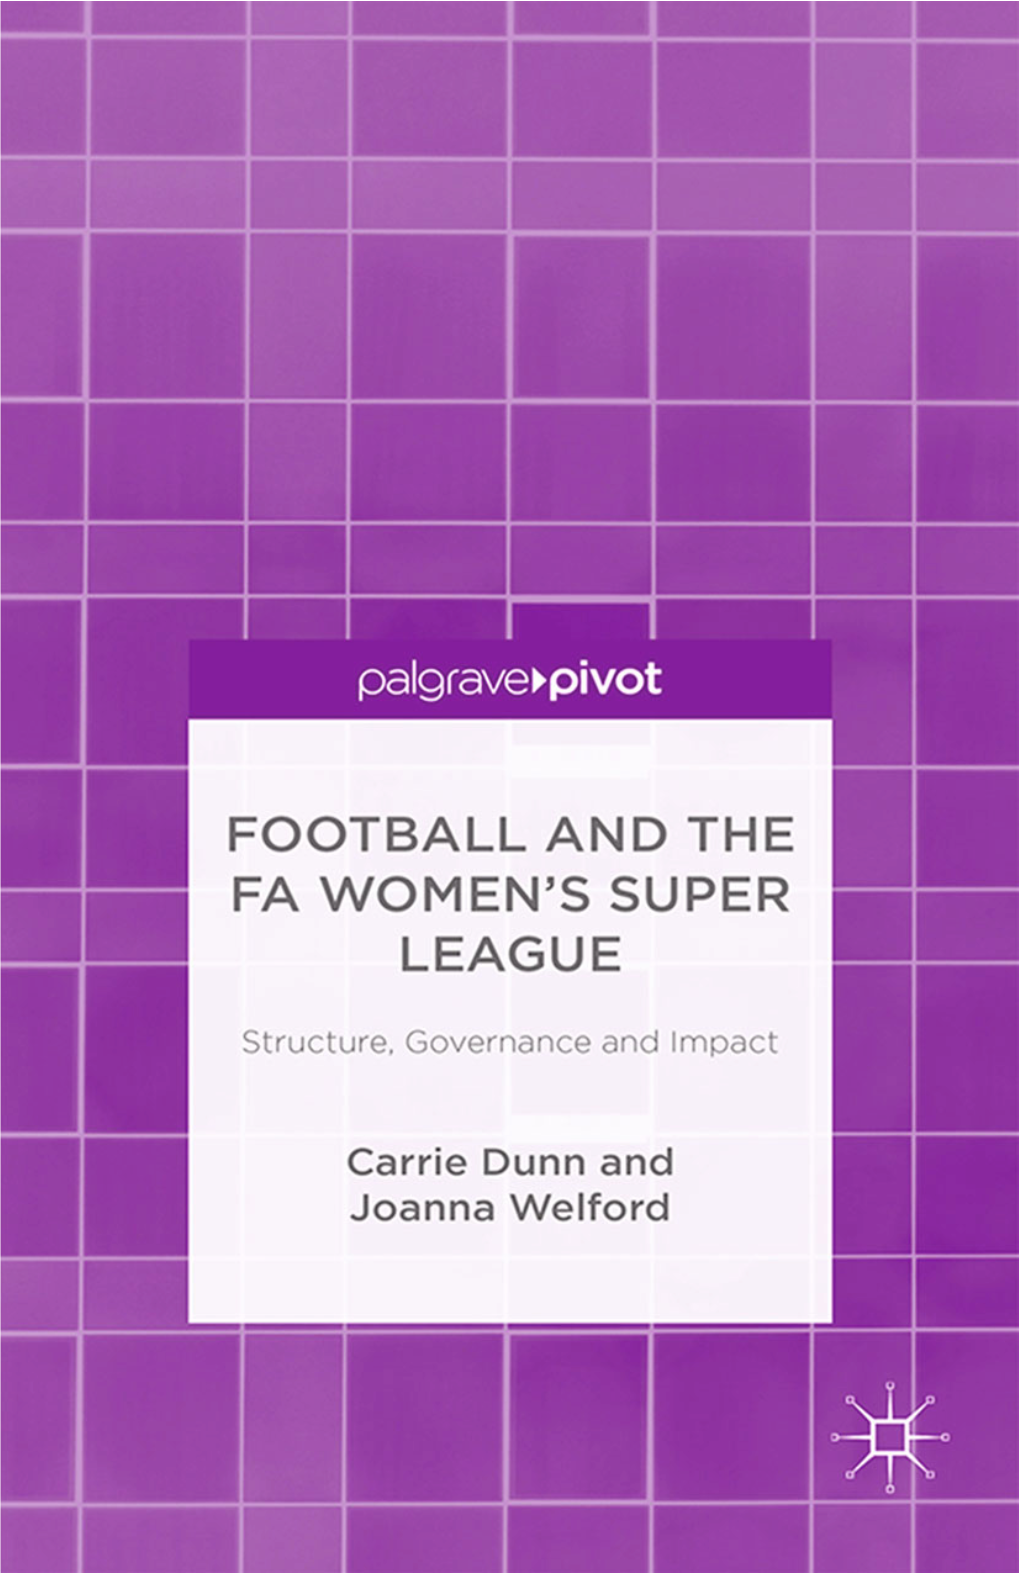 Public Reaction to the FAWSL 70 7 the Future of the FAWSL 79